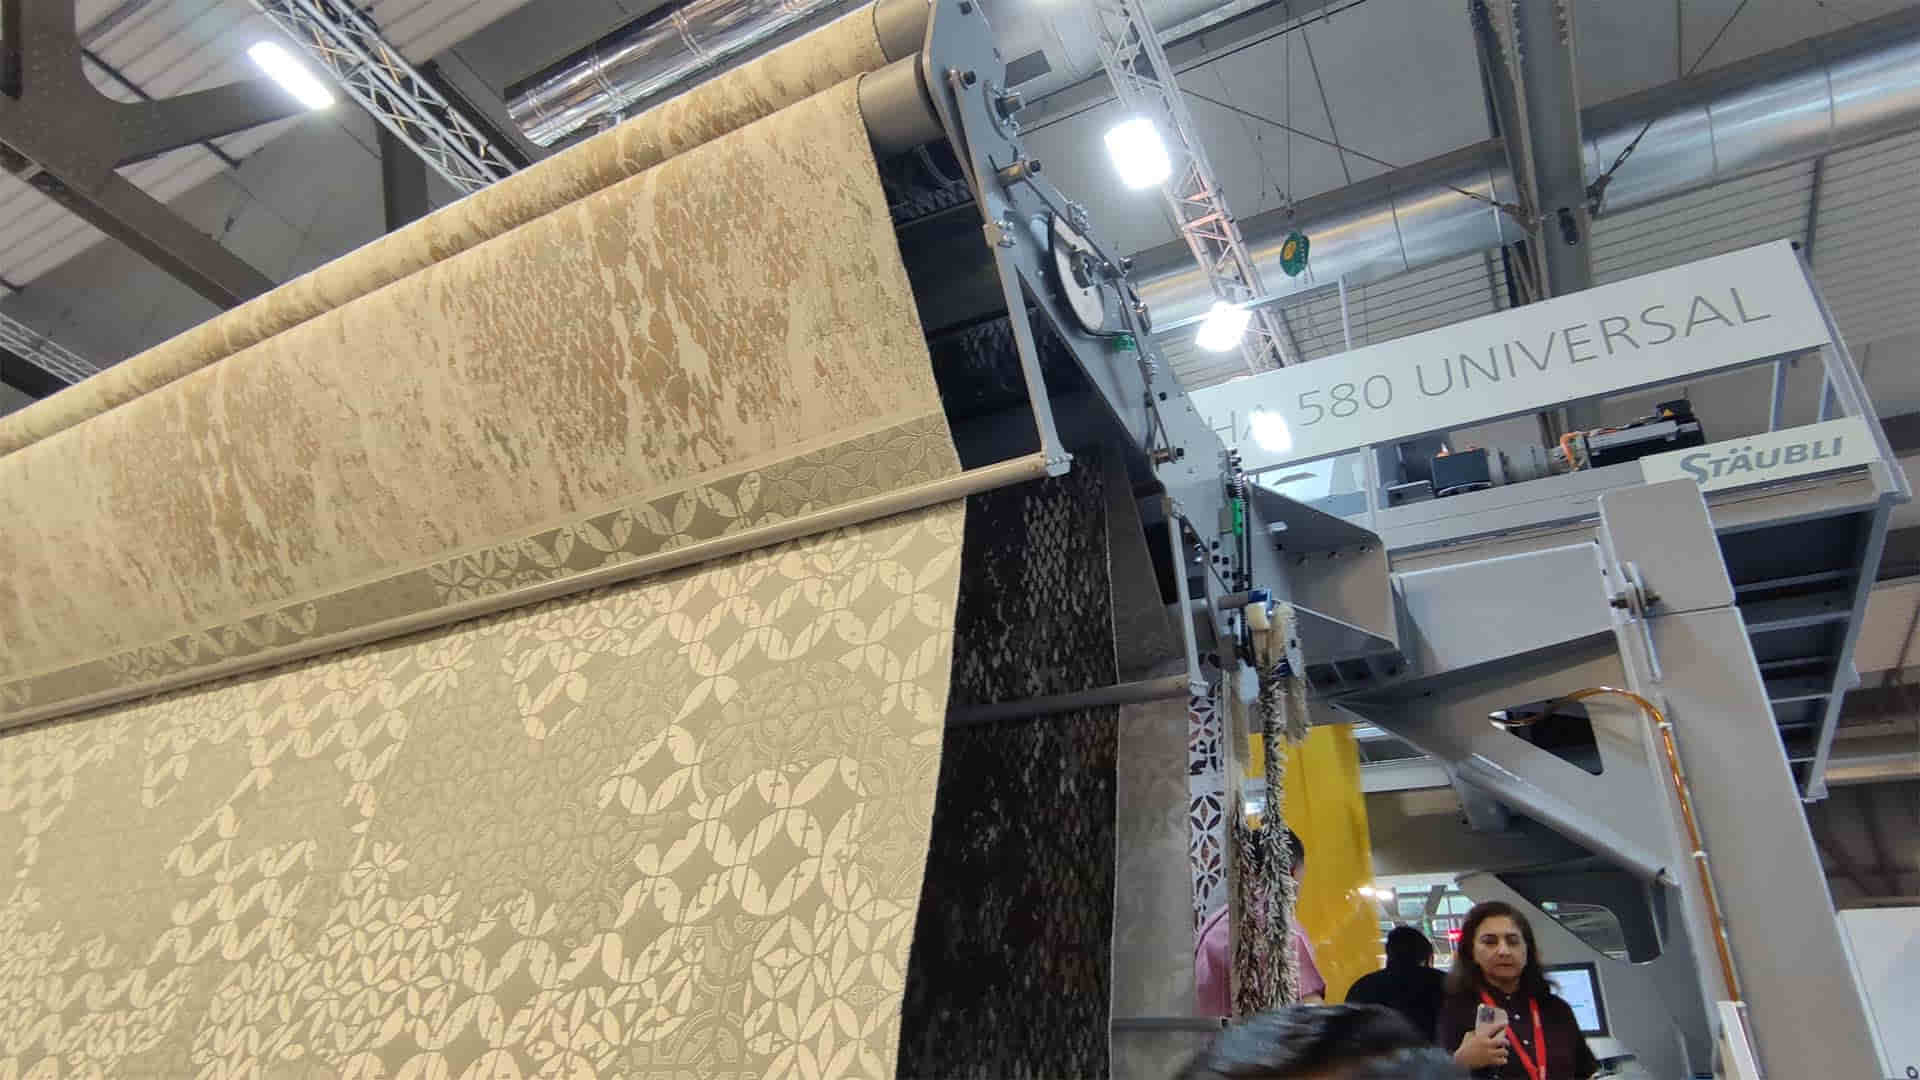 New discoveries at the limits of weaving with Vandewiele at ITMA 2023 -  Textilegence